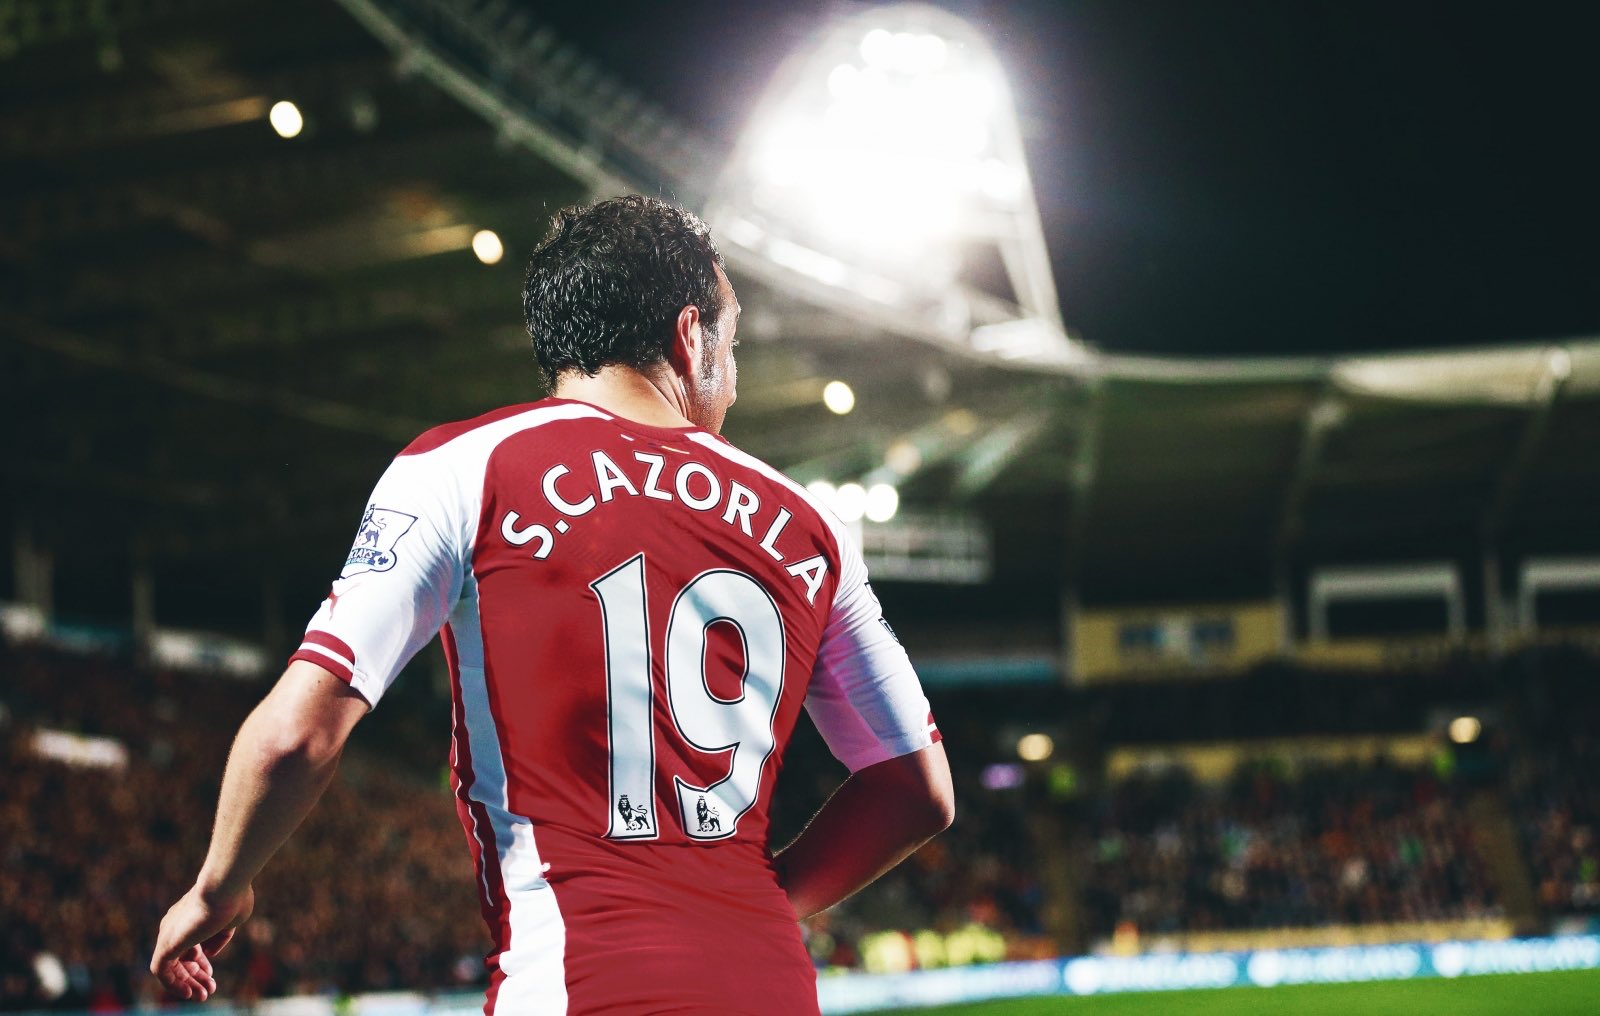 Happy birthday to the our Little Magician, Santi Cazorla! Love this man!  